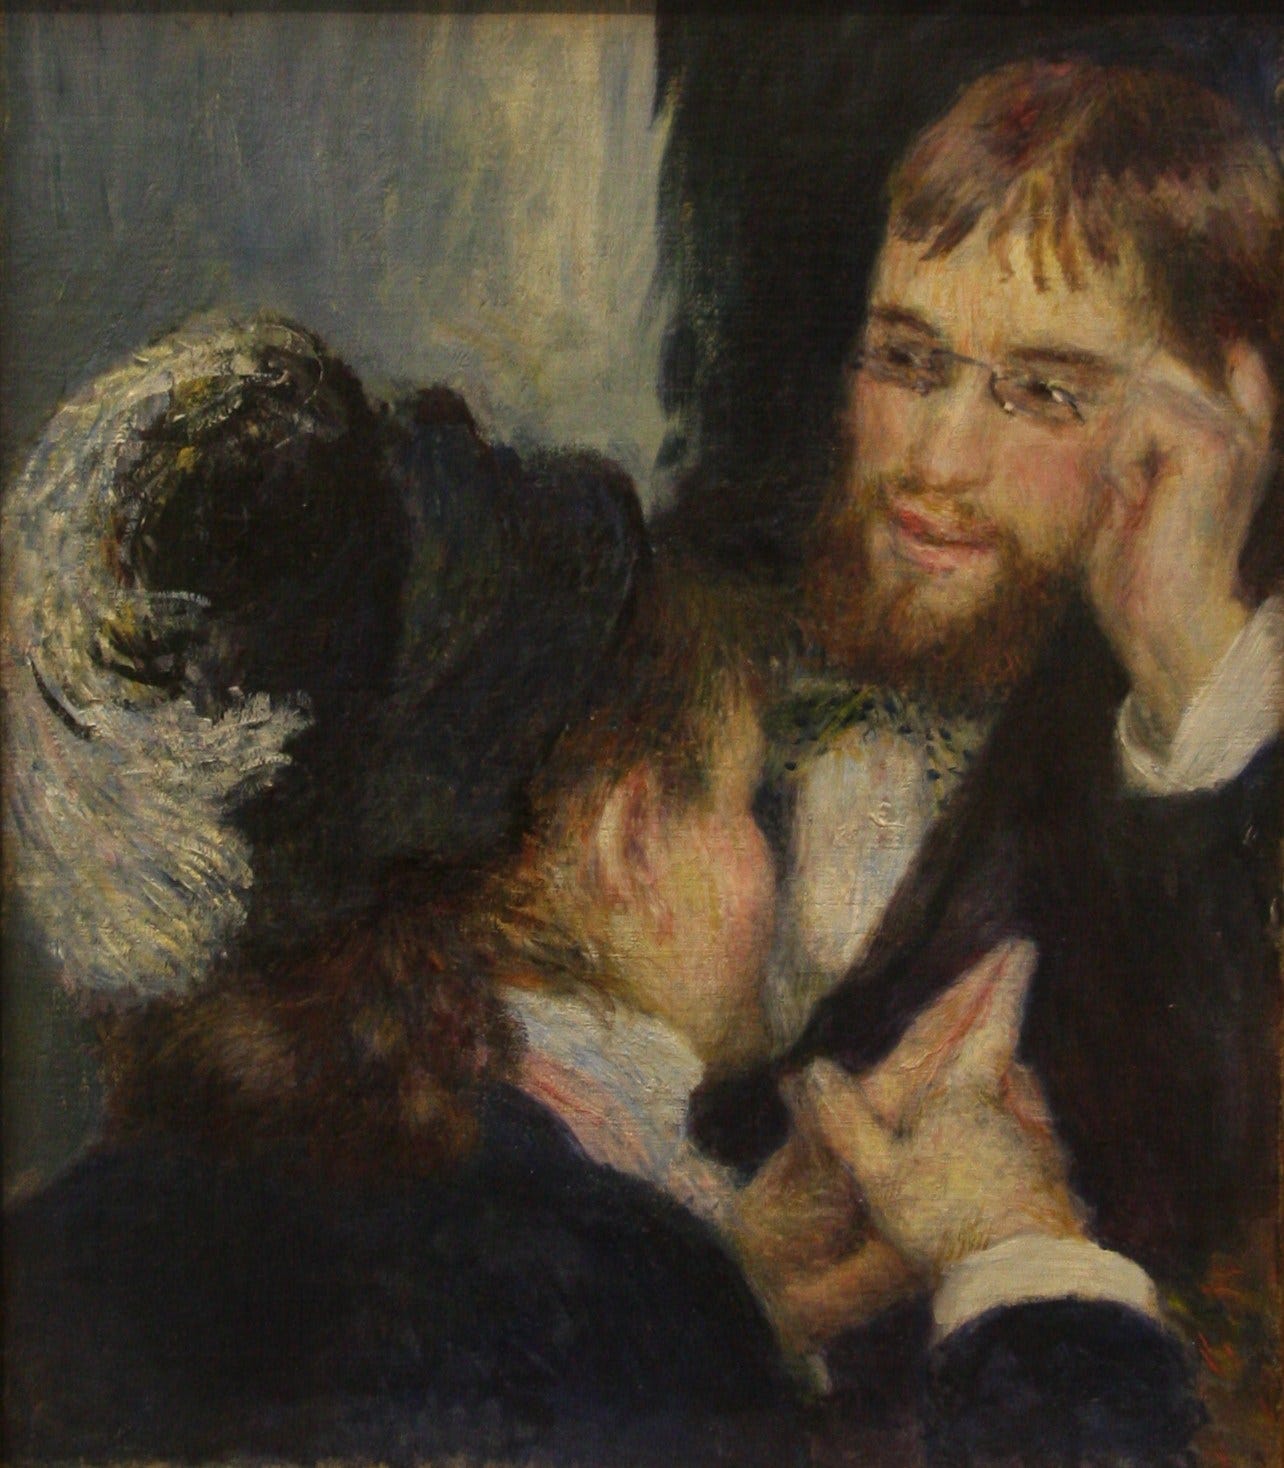 Renoir's The Conversation with a young man with glasses and a beard listening to a woman with her back to us wearing a black hat with white feather.